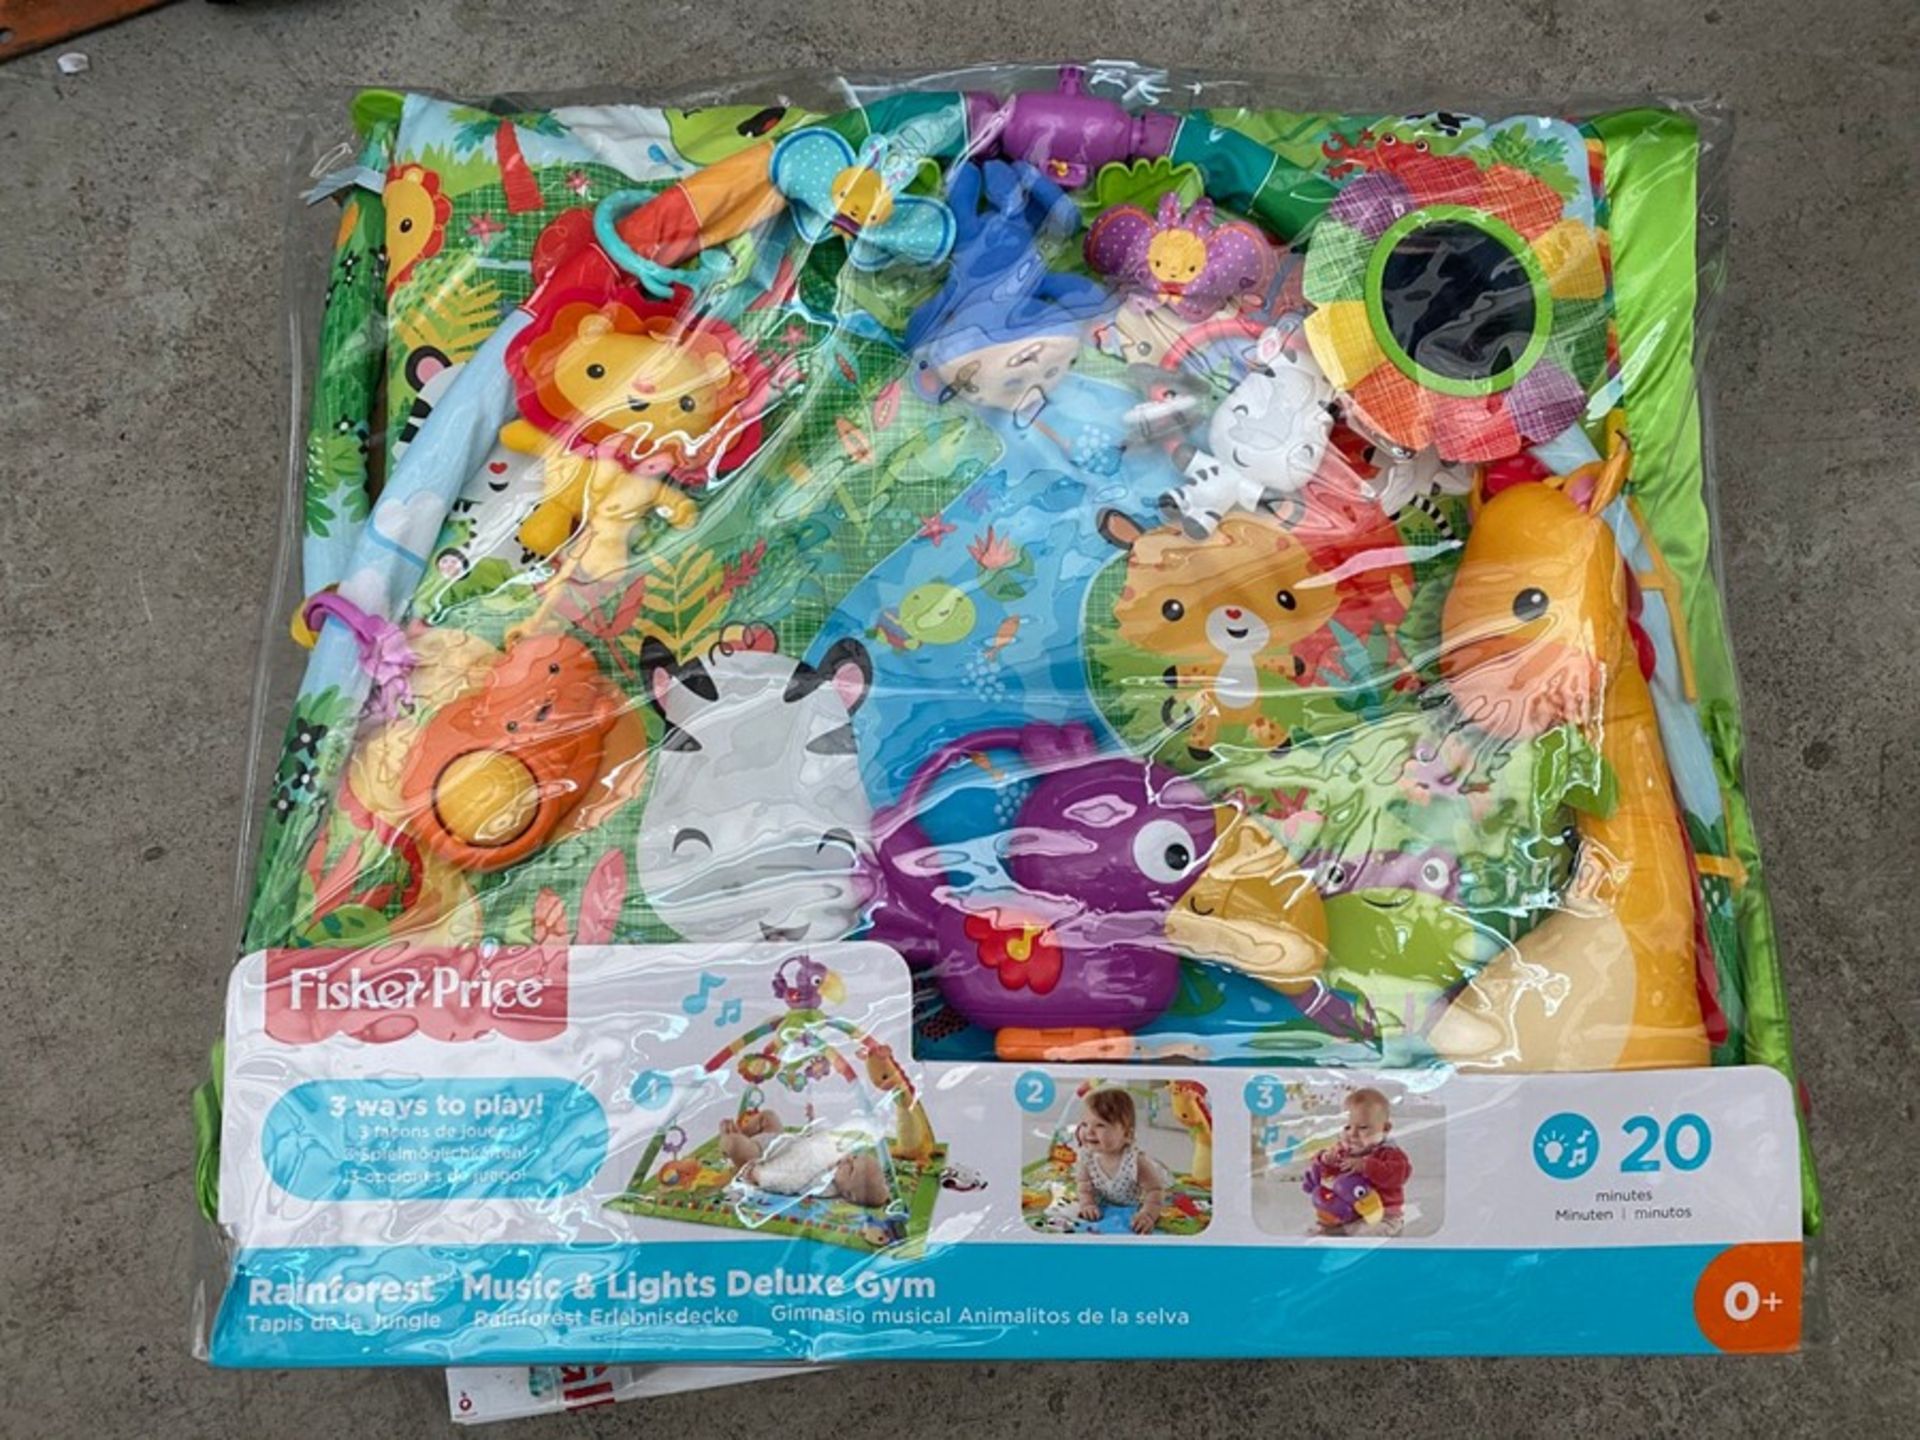 FISHER PRICE RAINFOREST 3 WAYS TO PLAY GYM IN PACKING